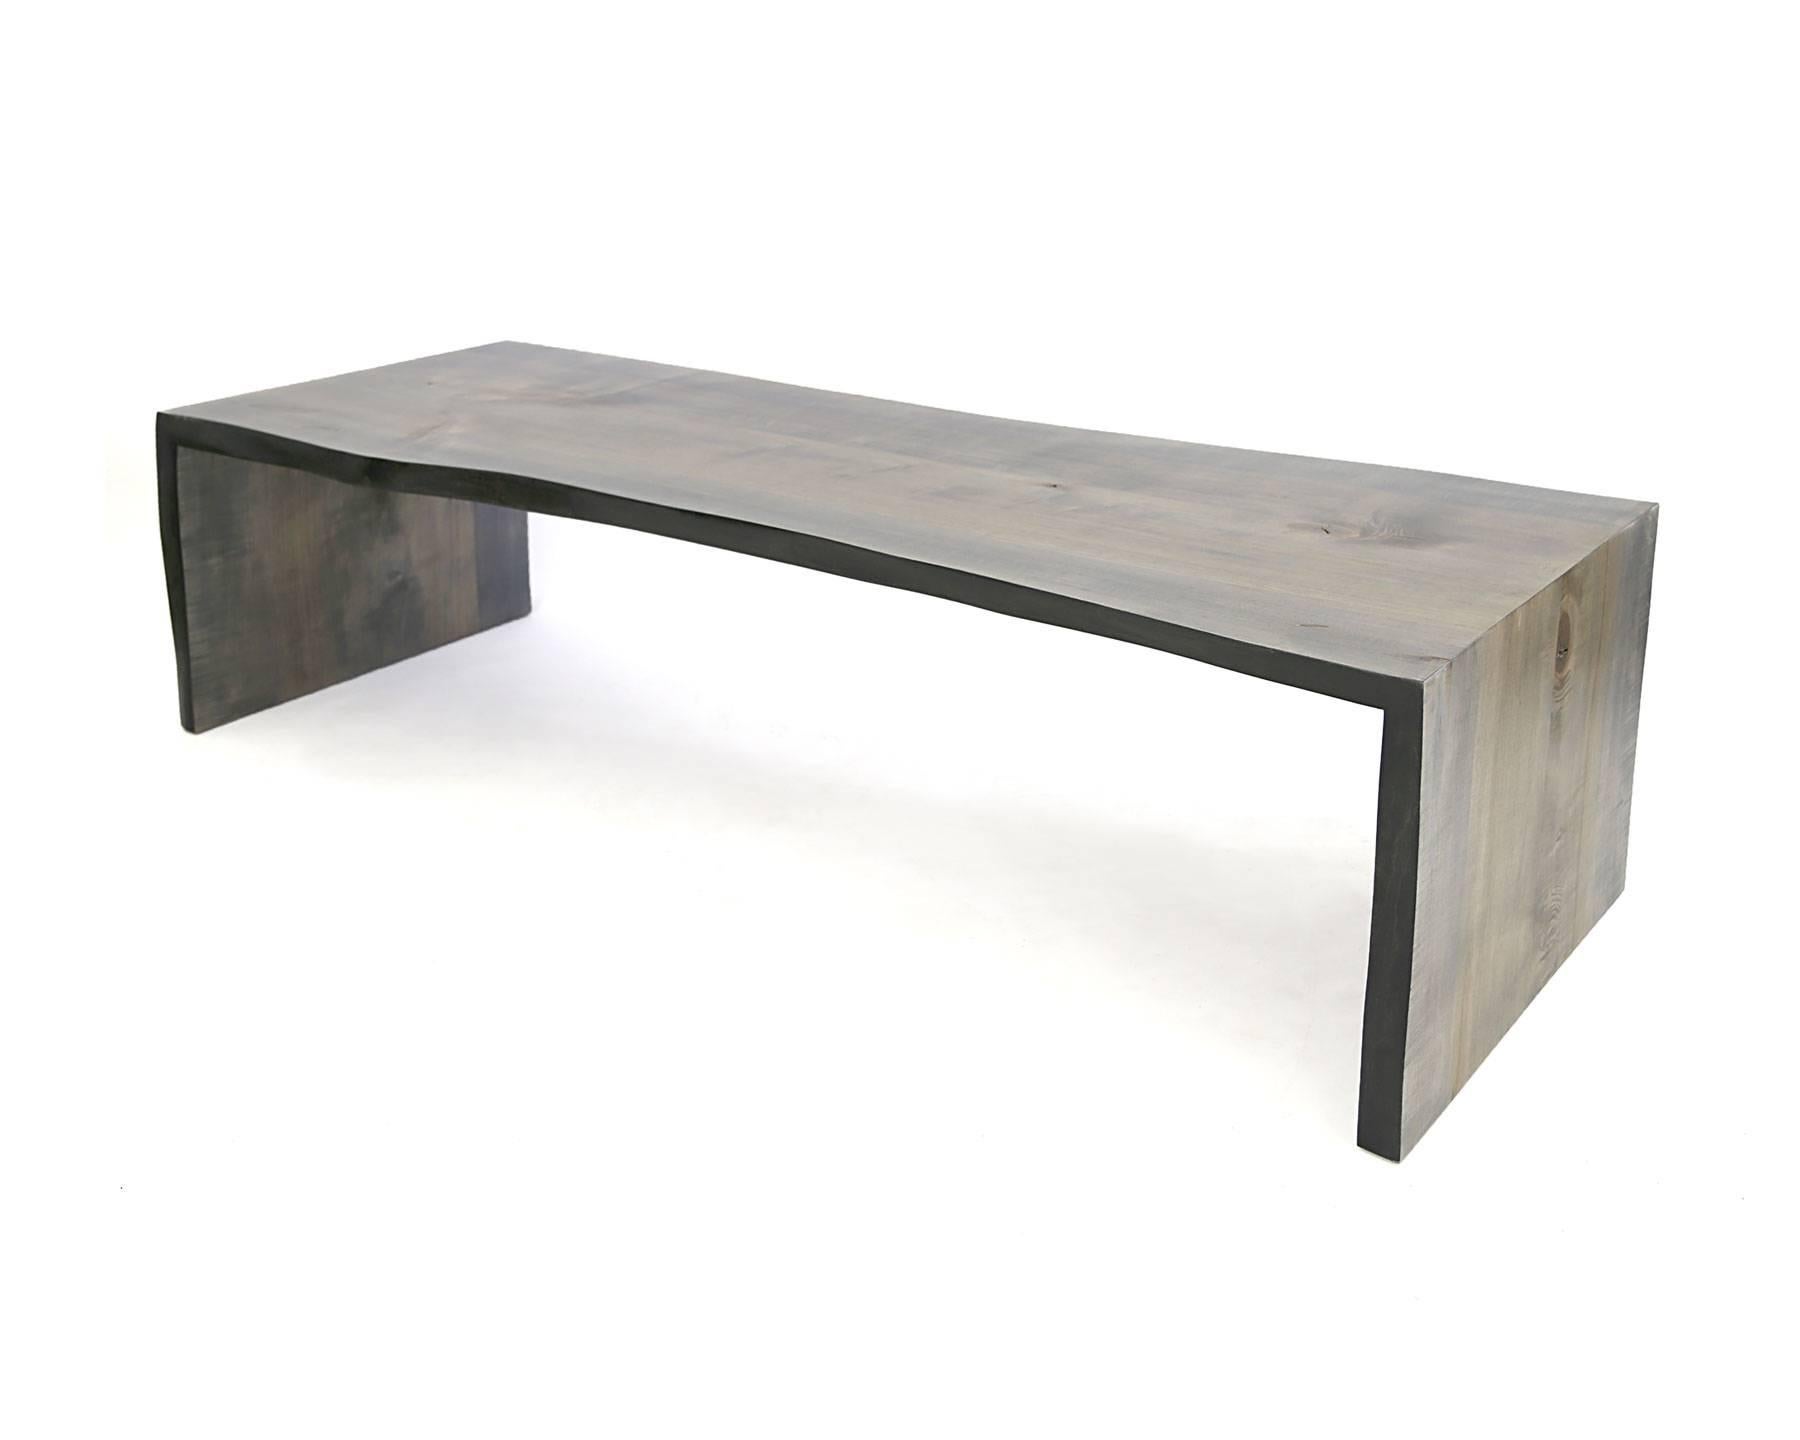 A relatively large coffee table with our custom driftwood finish on a maple live edge slab. The 